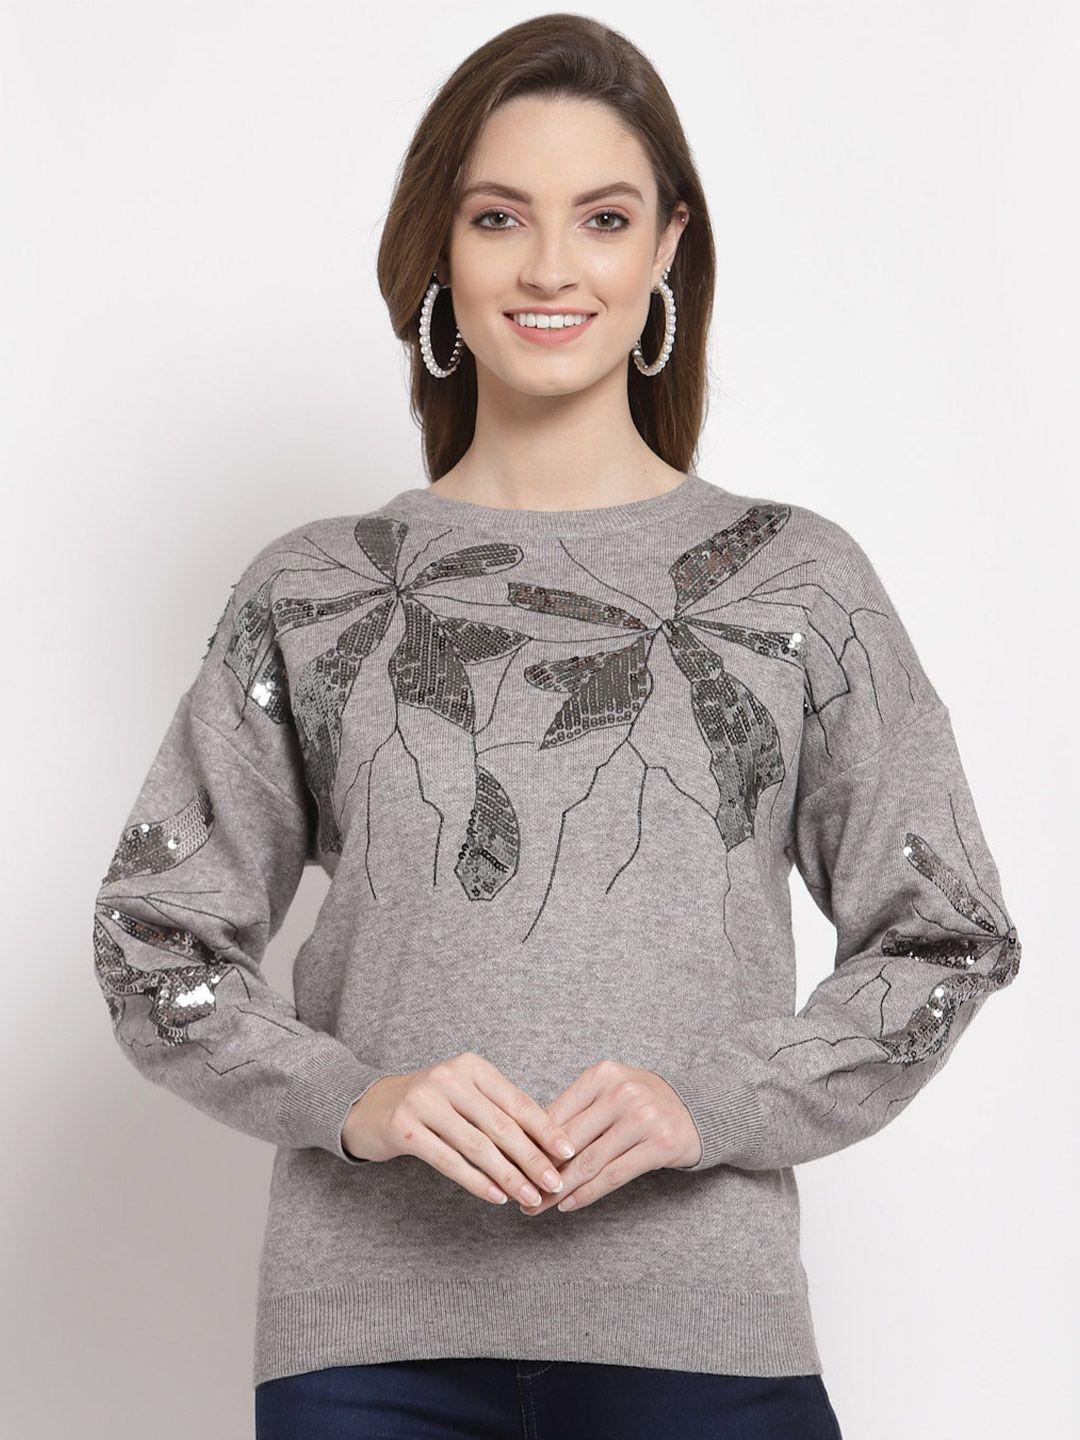 mafadeny women printed pullover with embellished detail